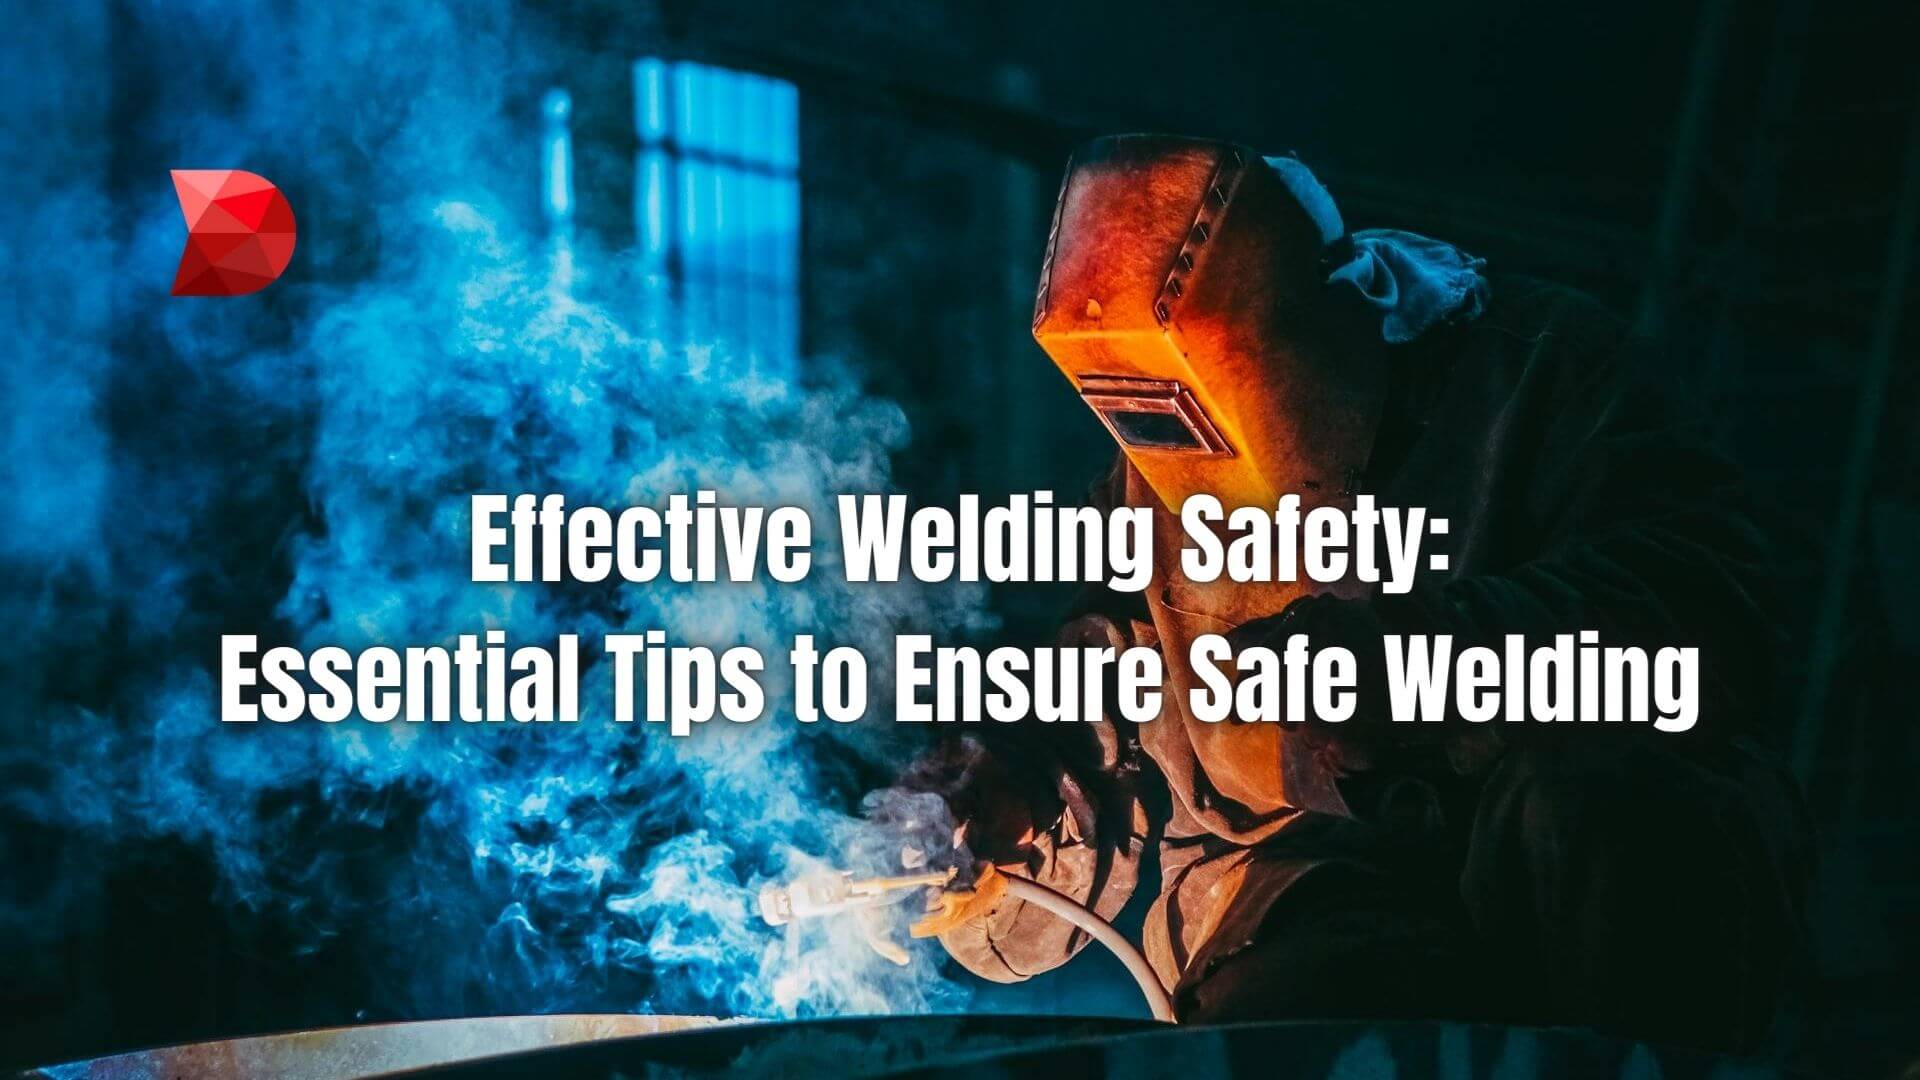 Maximize safety in your welding projects! Click here to learn expert tips and essential advice to prevent accidents and injuries.